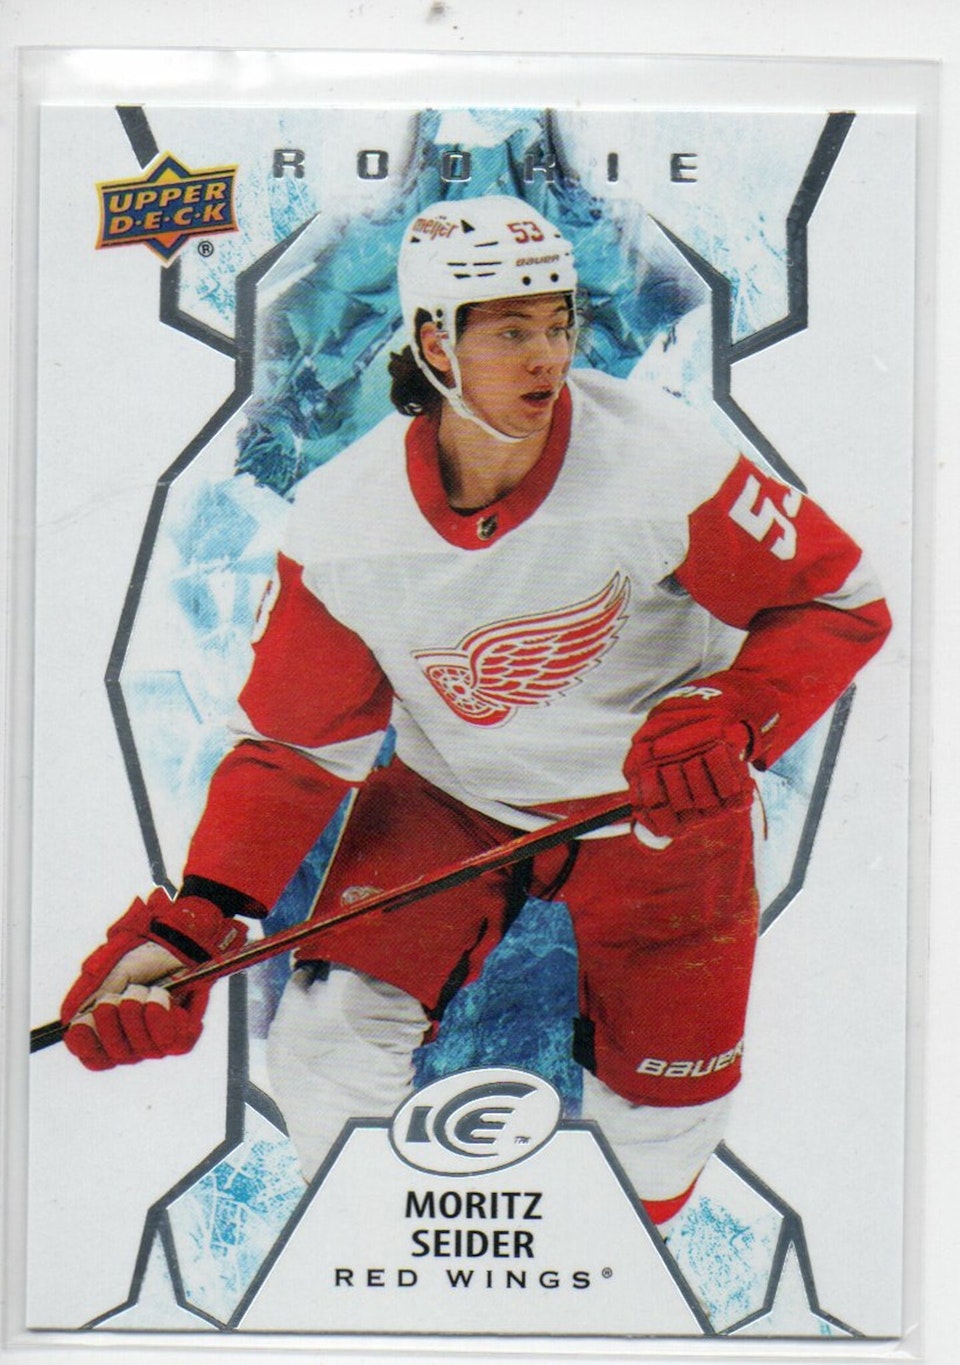 2021-22 Upper Deck Ice #148 Moritz Seider RC (50-205x4-RED WINGS)